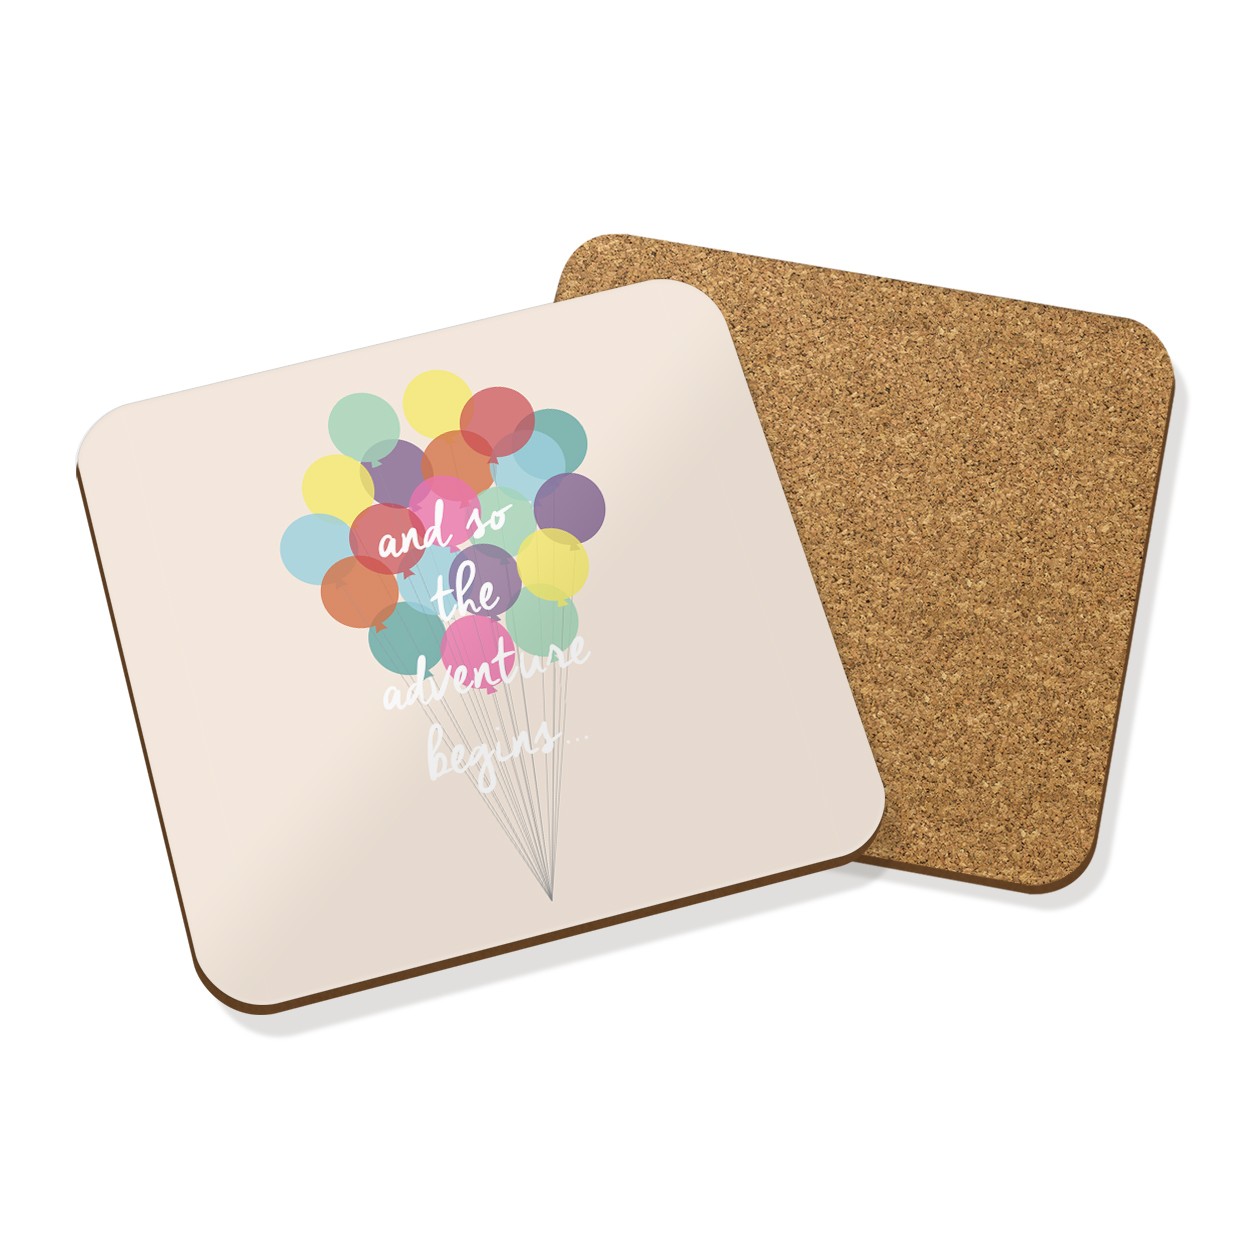 AND SO THE ADVENTURE BEGINS DRINKS COASTER MAT CORK SQUARE SET X4